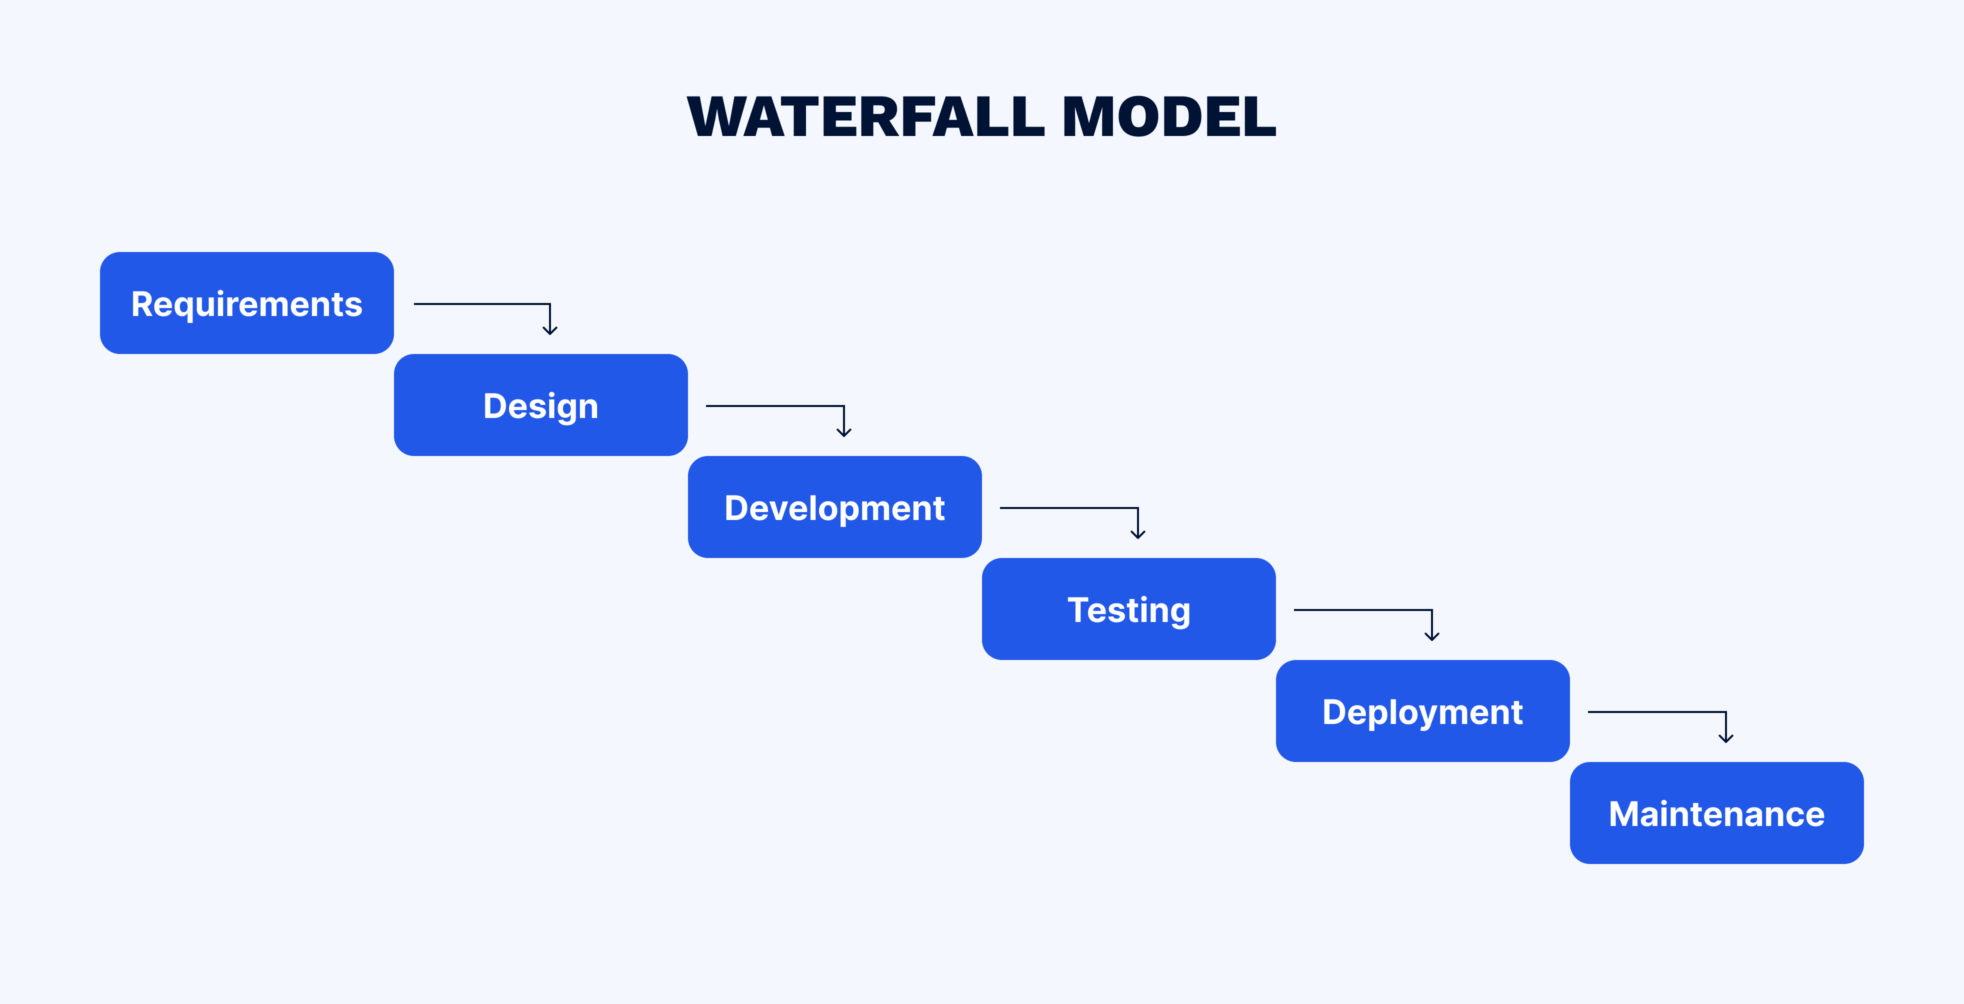 The 6 phases of Waterfall model